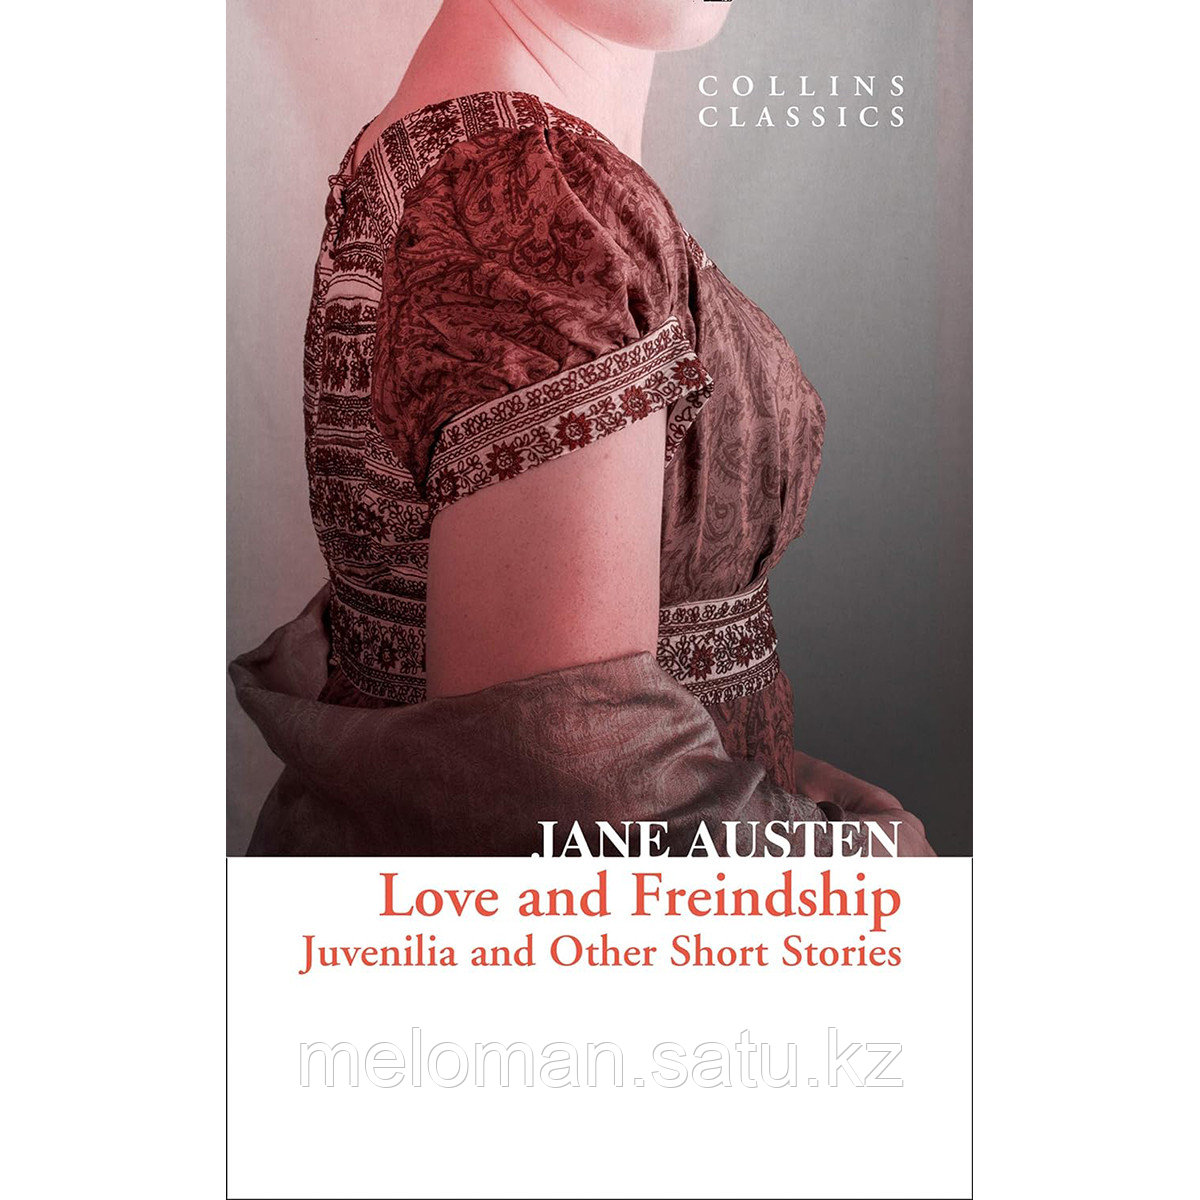 Austen J.: Love and Freindship. Juvenilia and Other Short Stories - фото 1 - id-p114029938